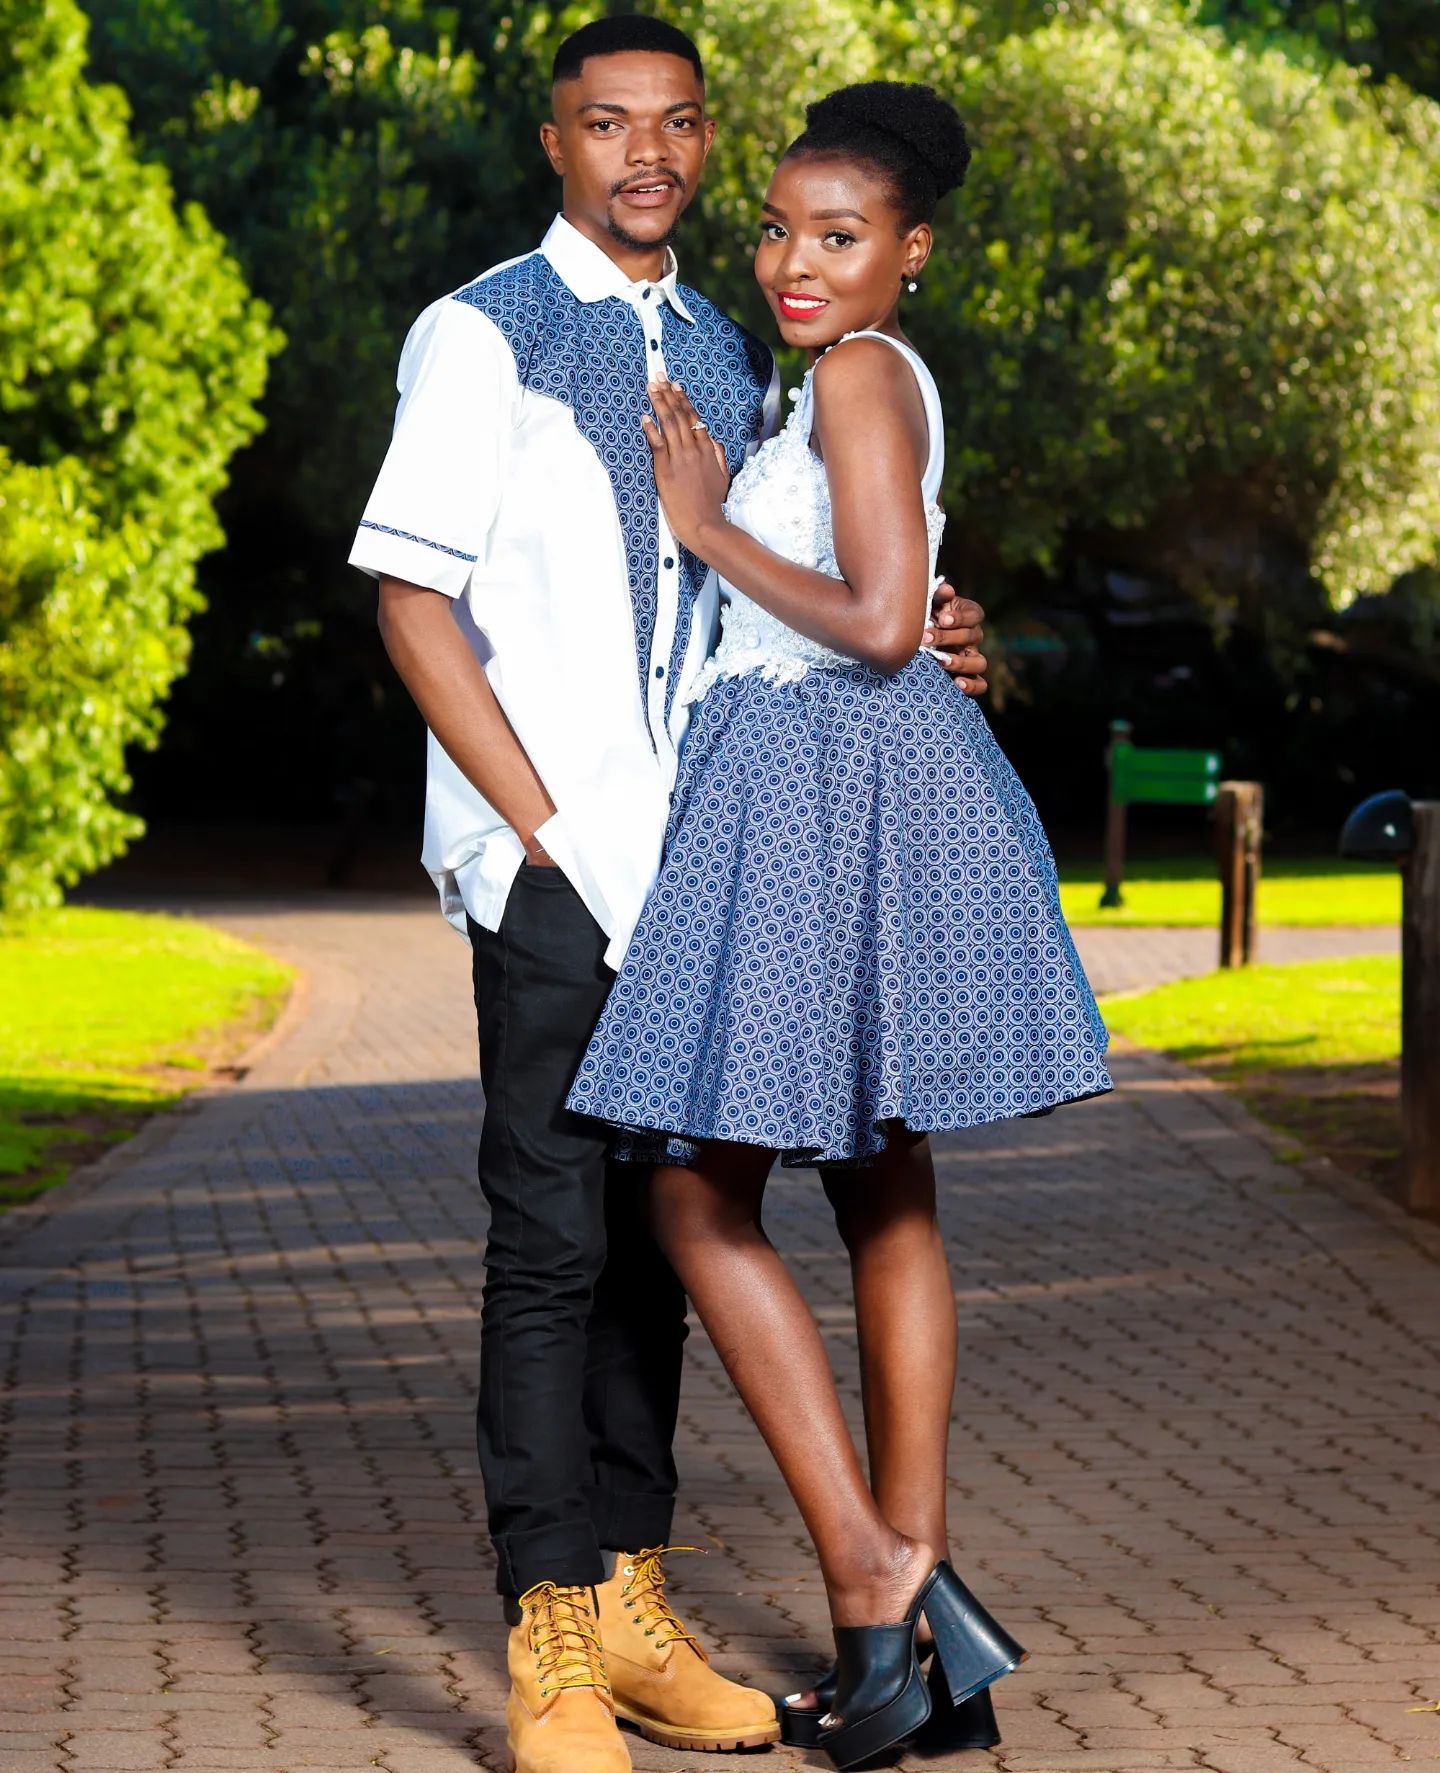 The Best South African Tswana Conventional Dresses For Wedding 20